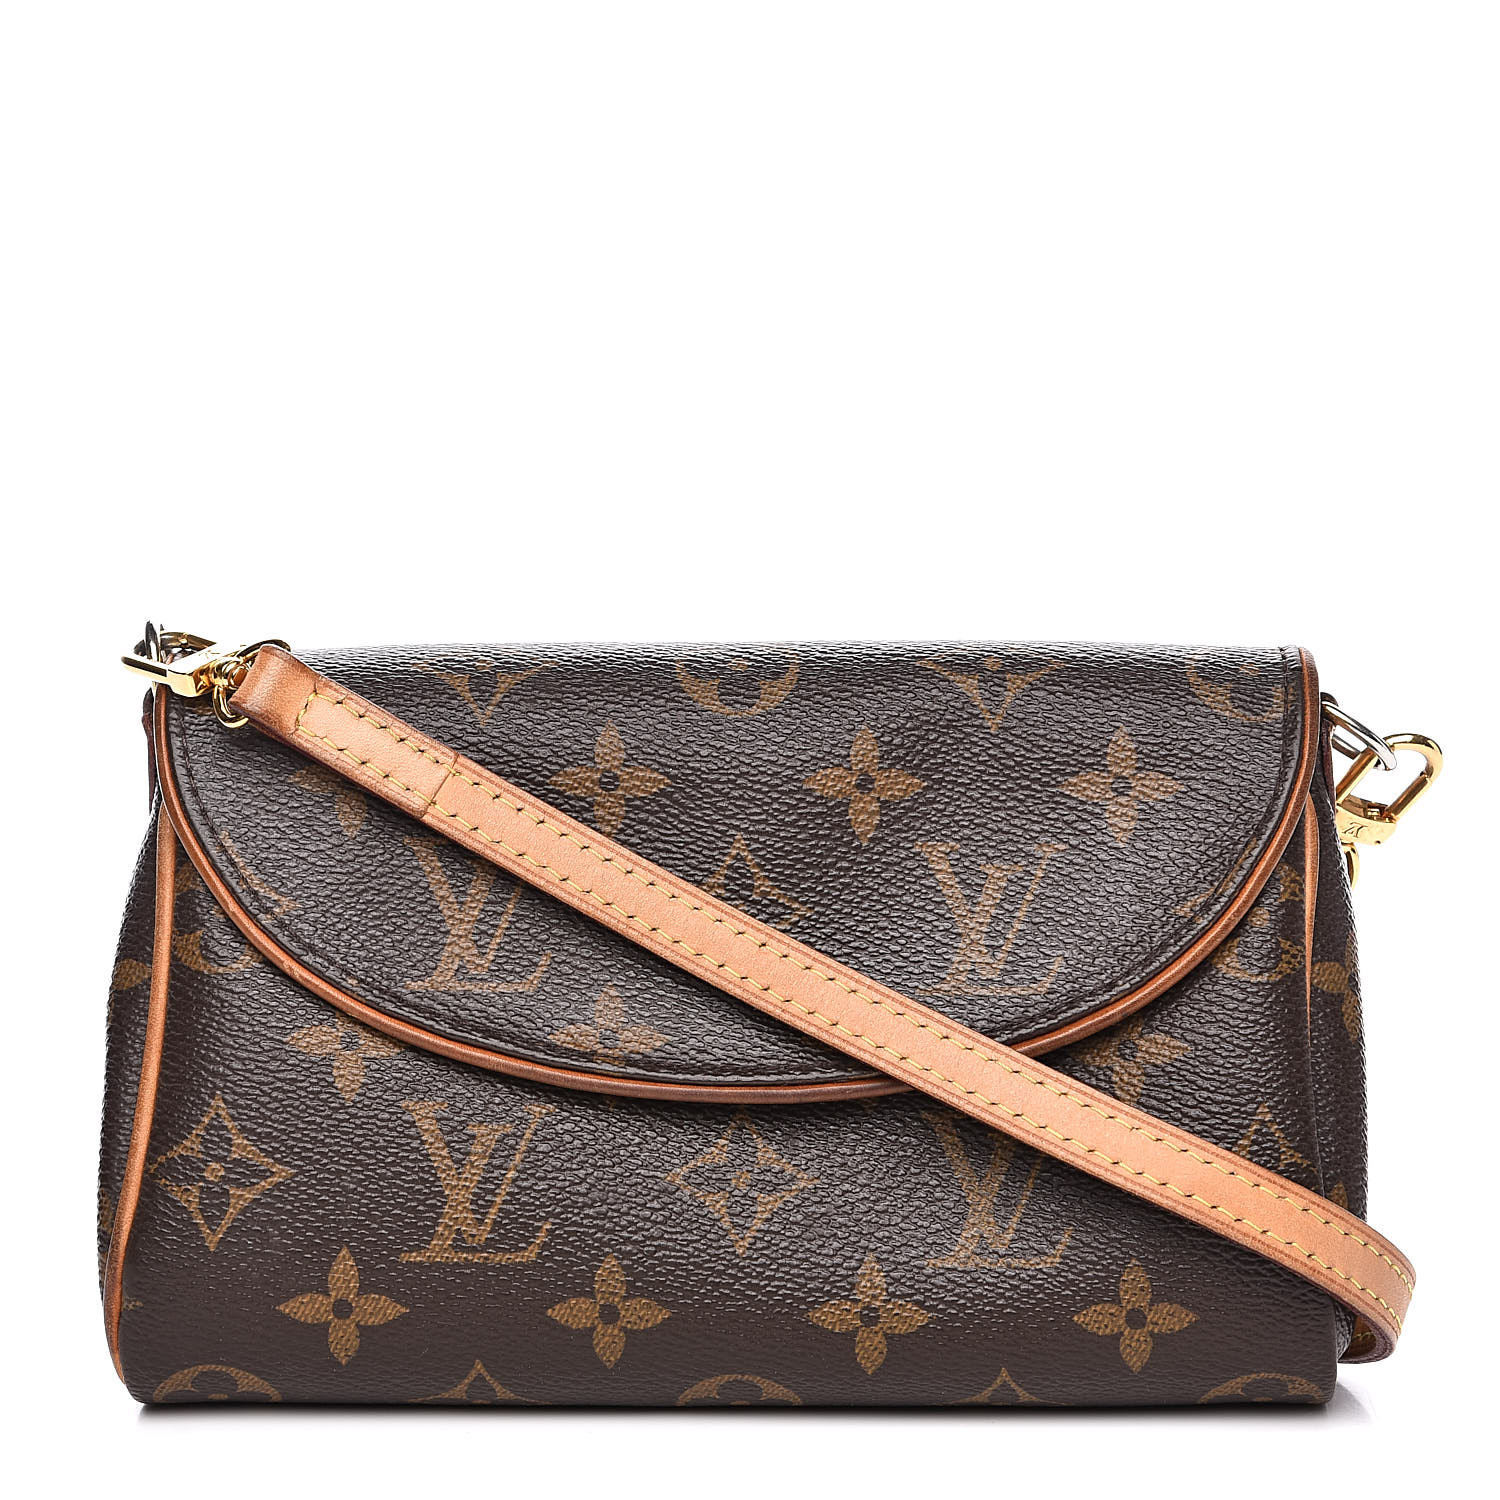 Louis Vuitton Crossbody Top Sellers, 56% OFF | lagence.tv